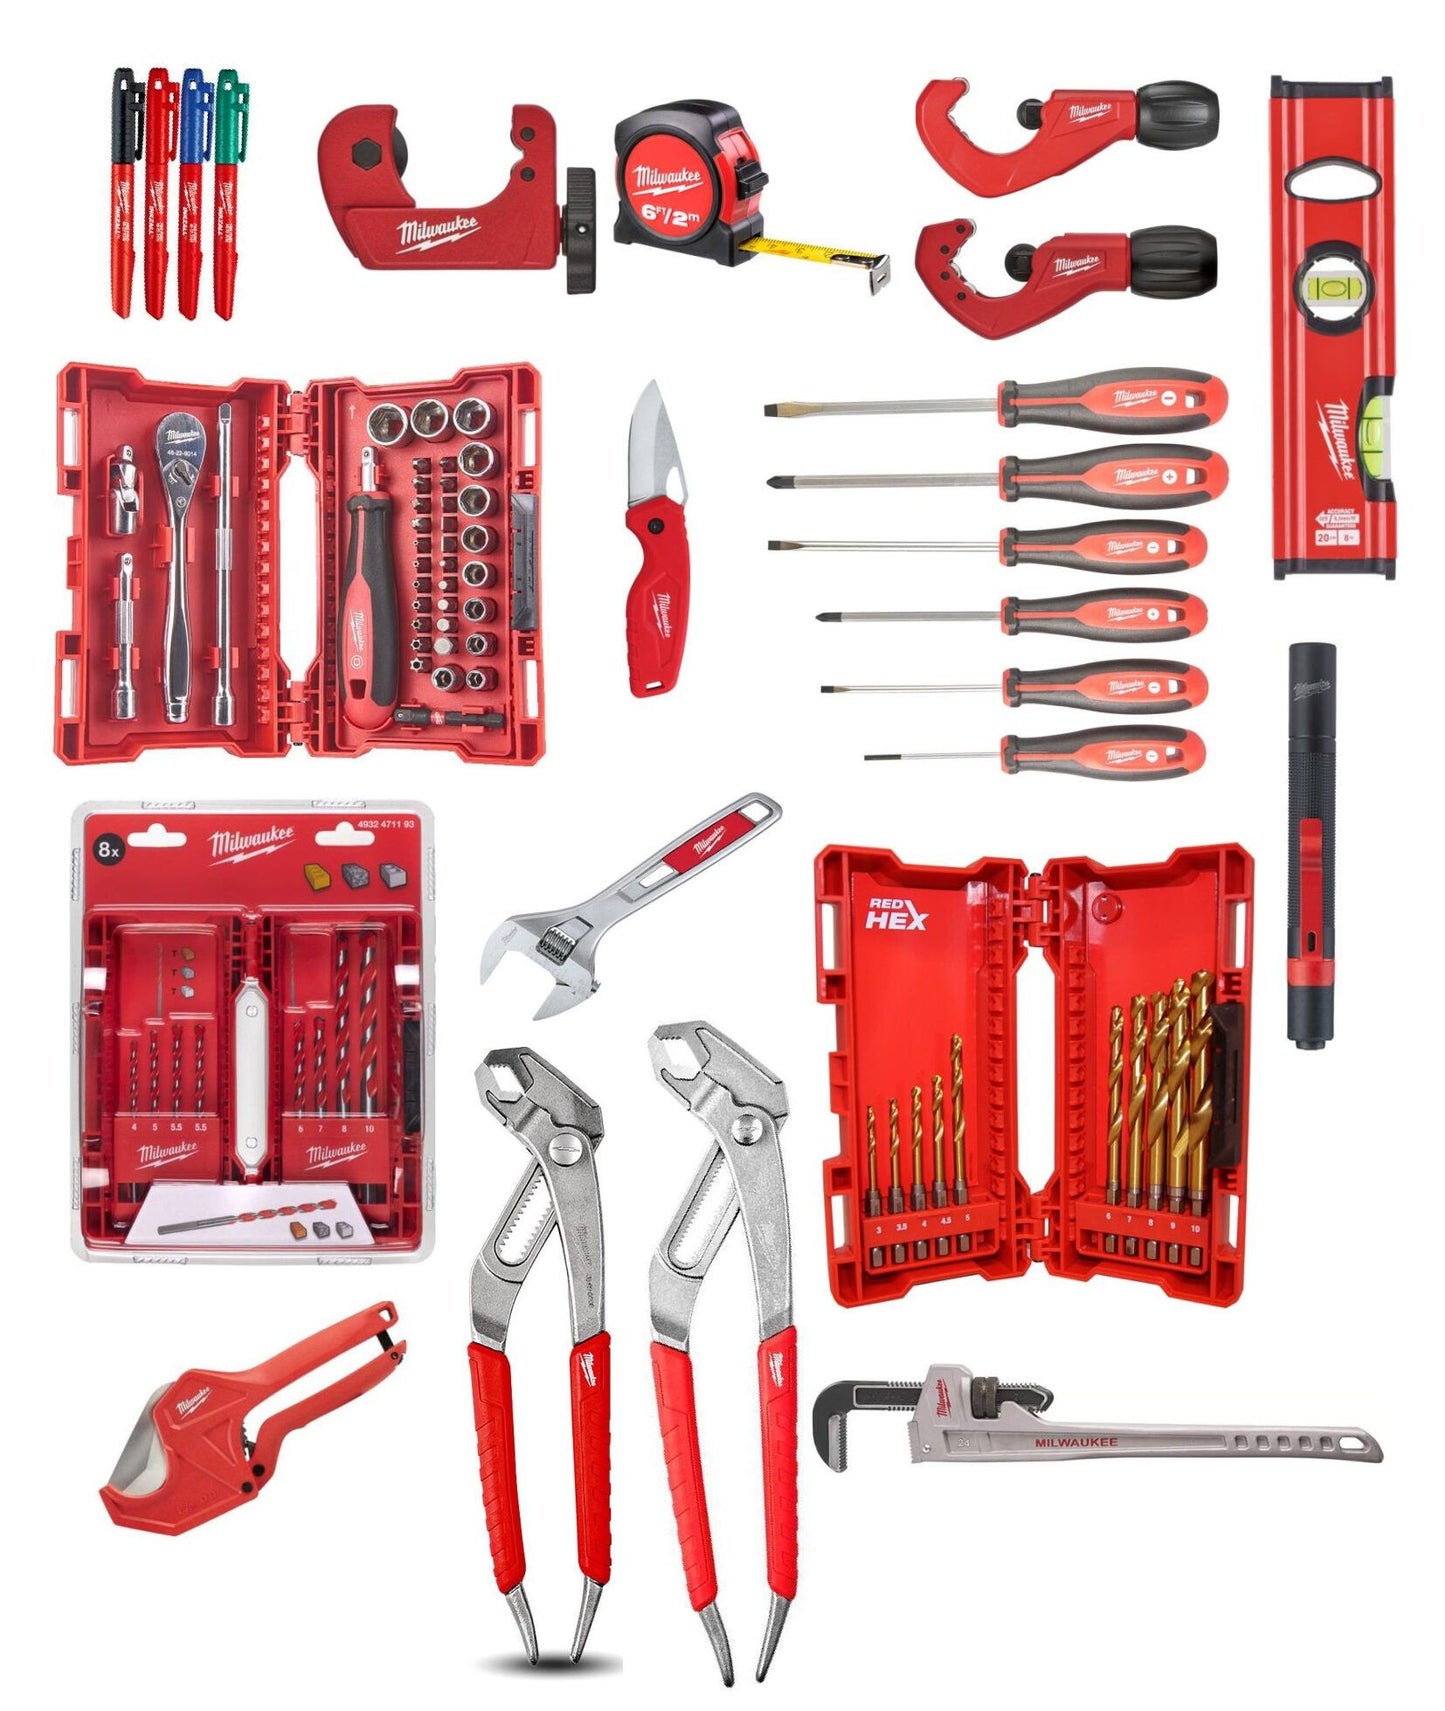 Packout Installer Kit with 17 Milwaukee tools